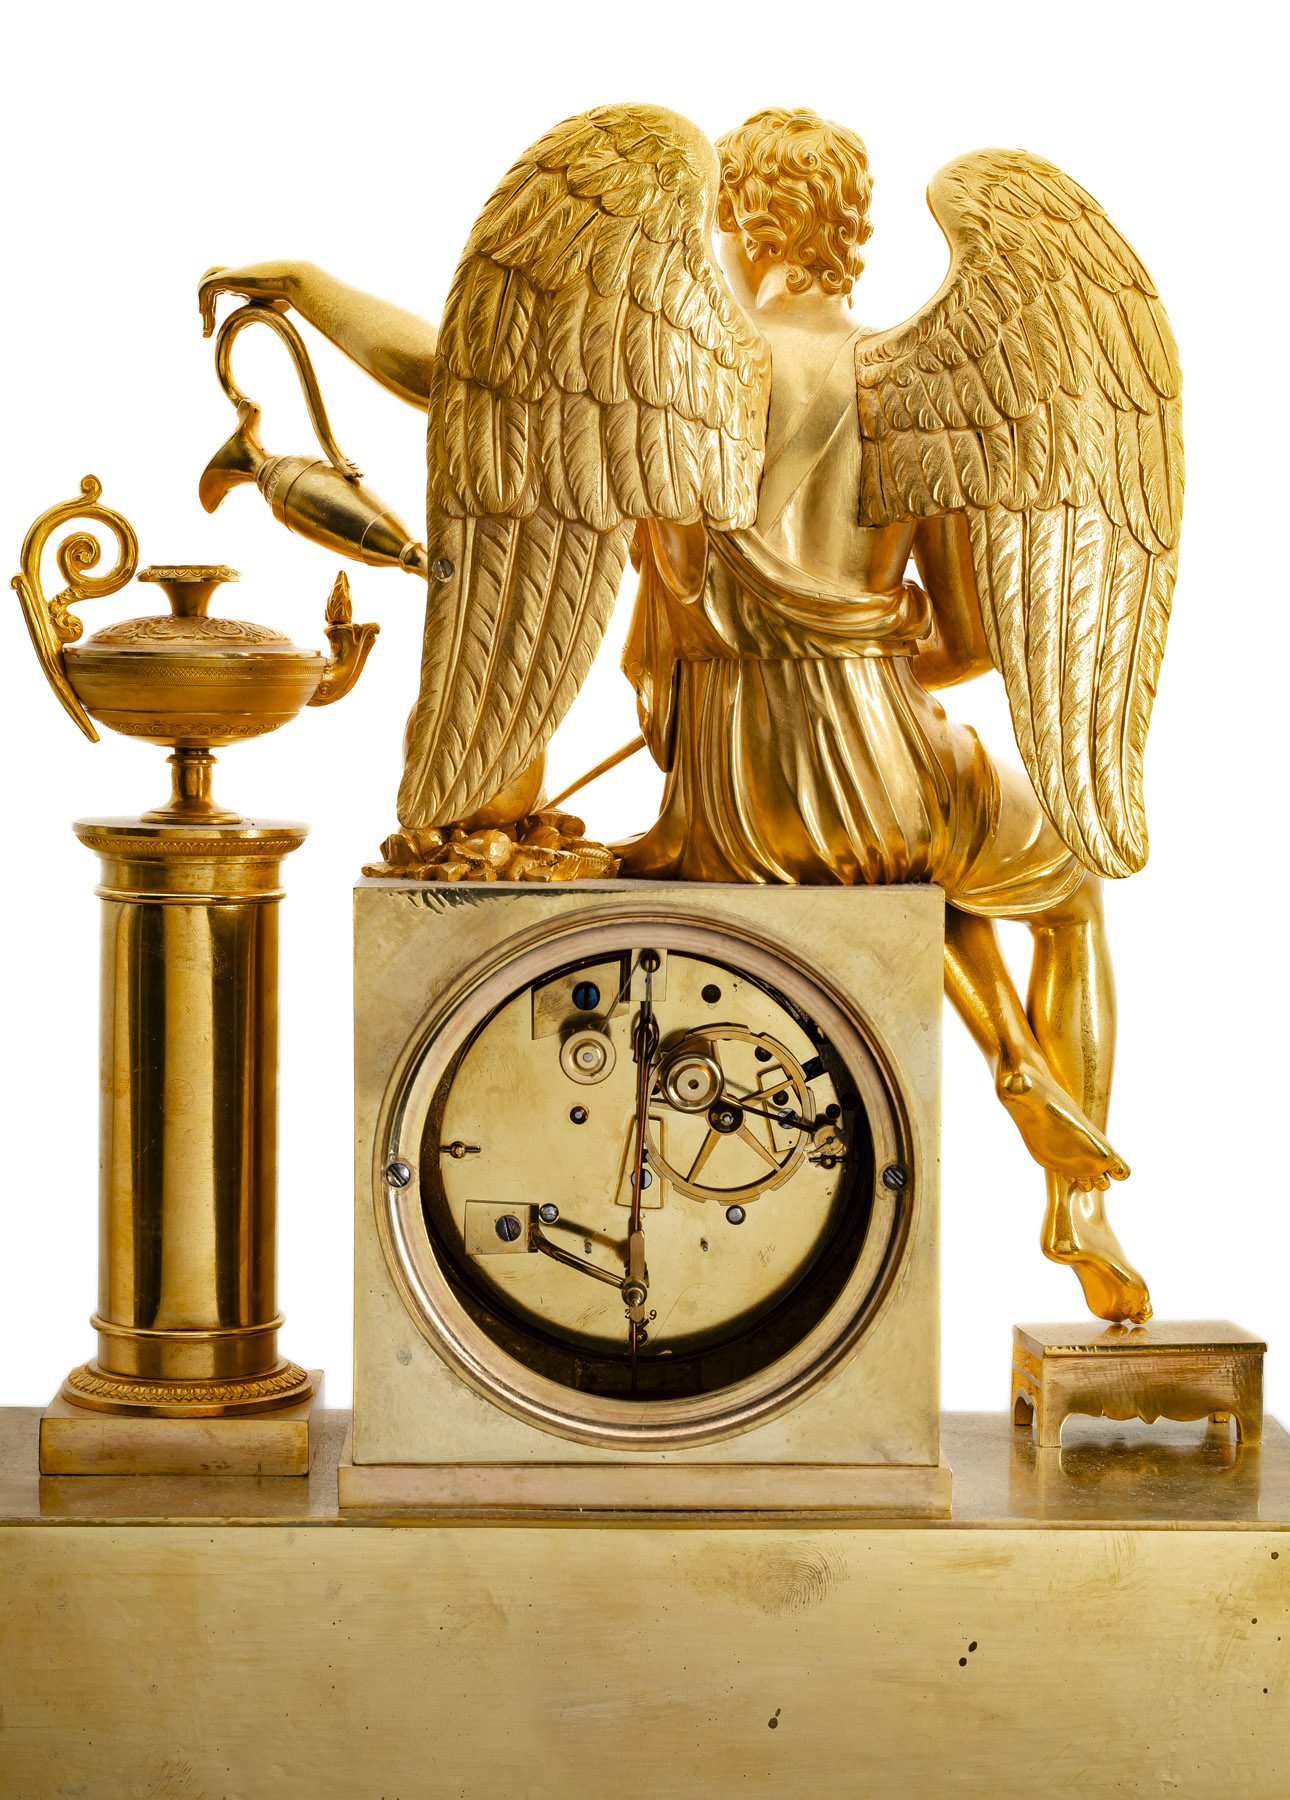 A FRENCH BRONZEGILT CHARLES X MANTLE CLOCK WITH AMOR - Image 2 of 3